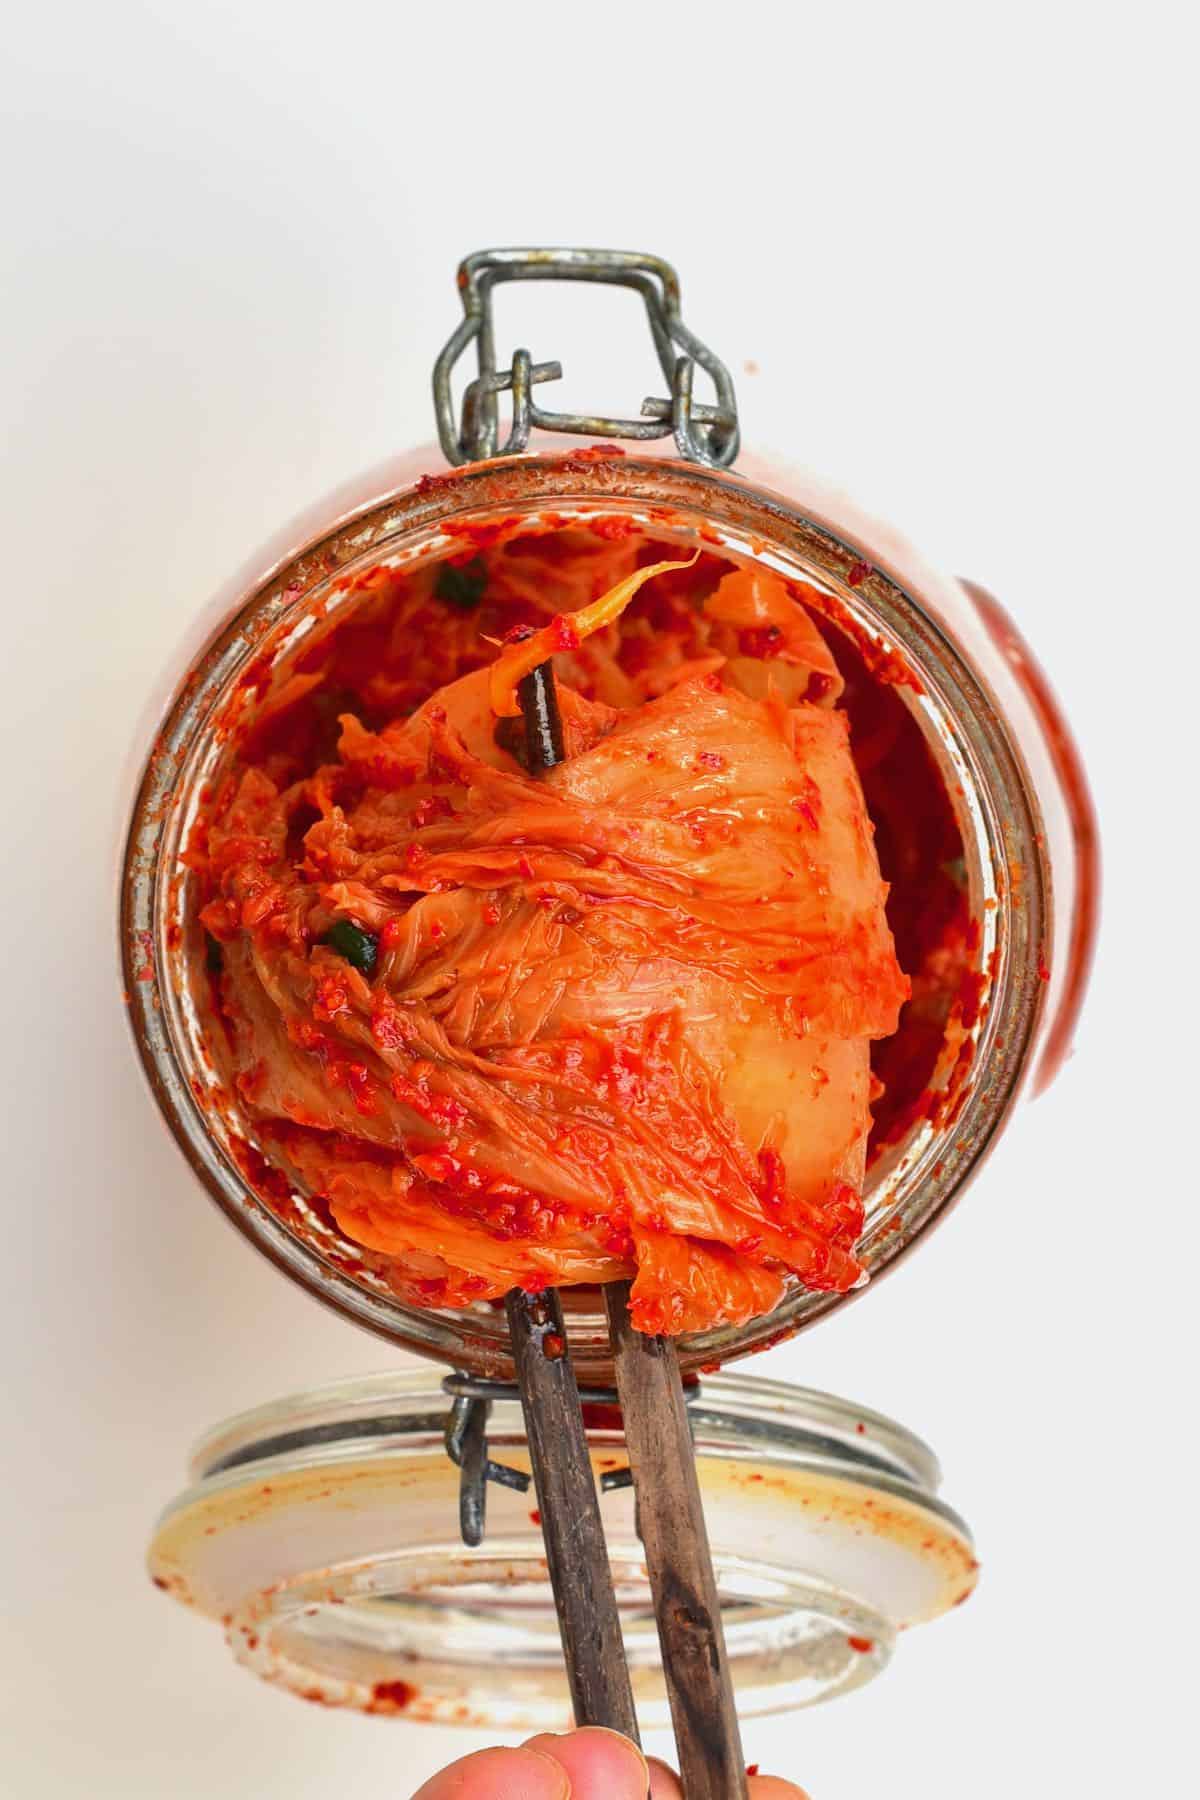 Getting kimchi out of a jar